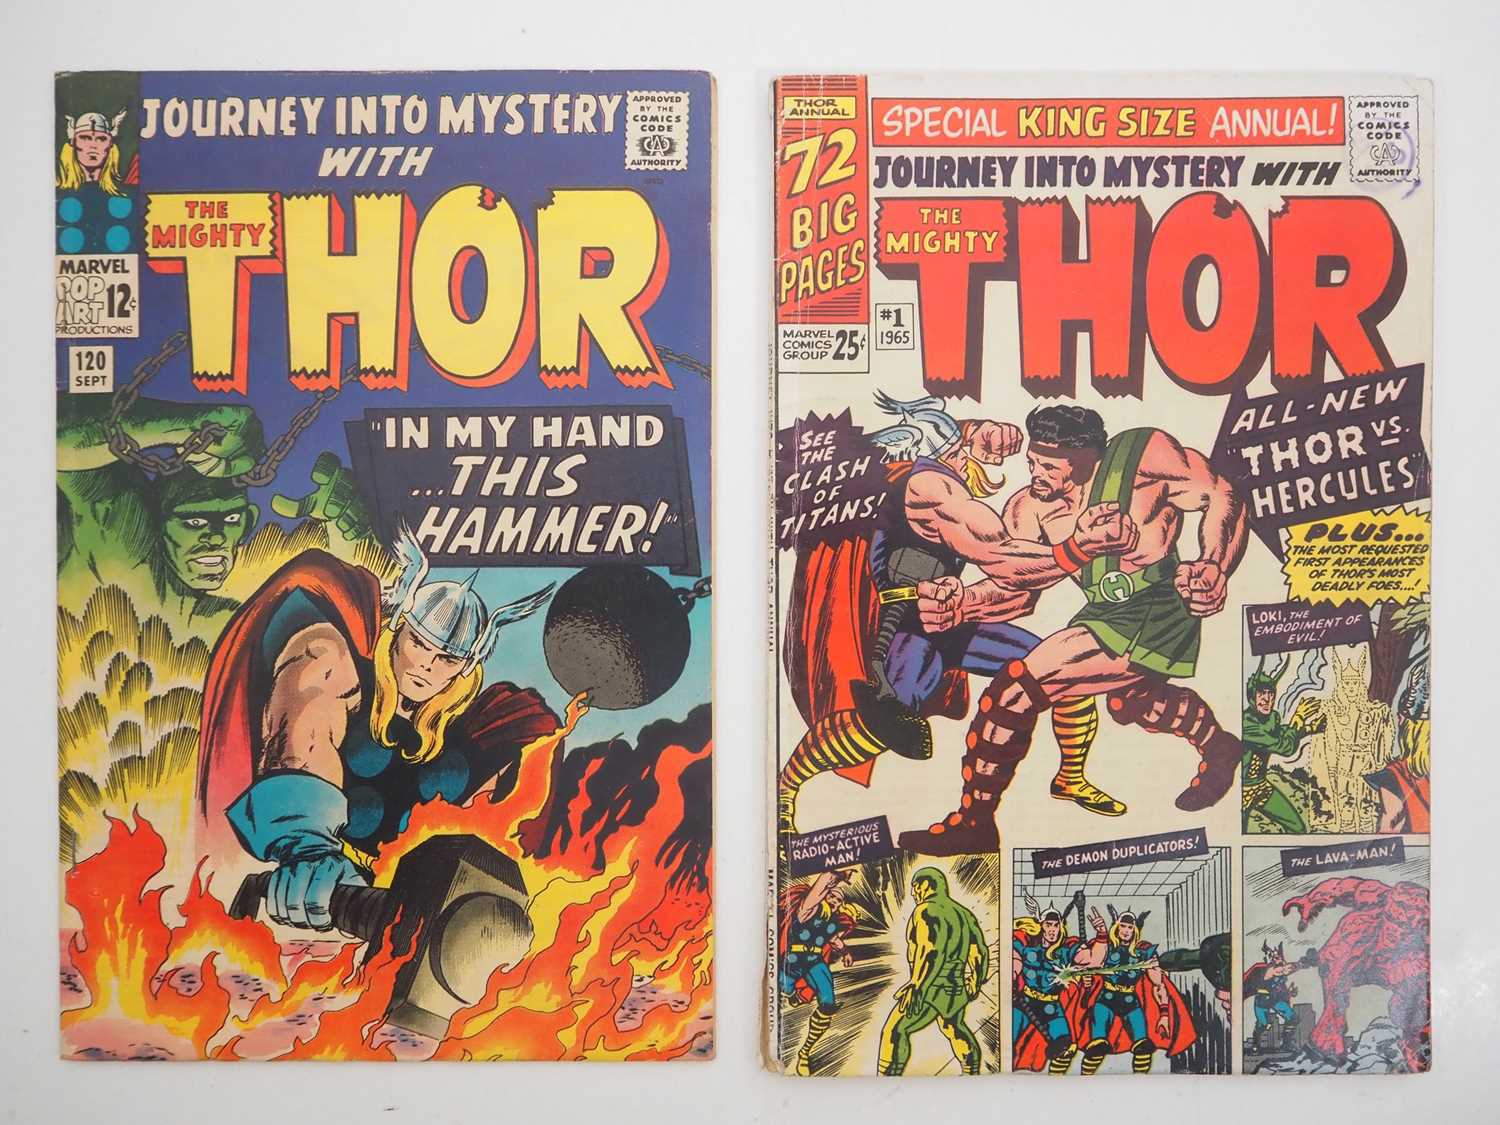 JOURNEY INTO MYSTERY #120 & KING SIZE ANNUAL #1 (2 in Lot) - (1965 - MARVEL) - Includes the first